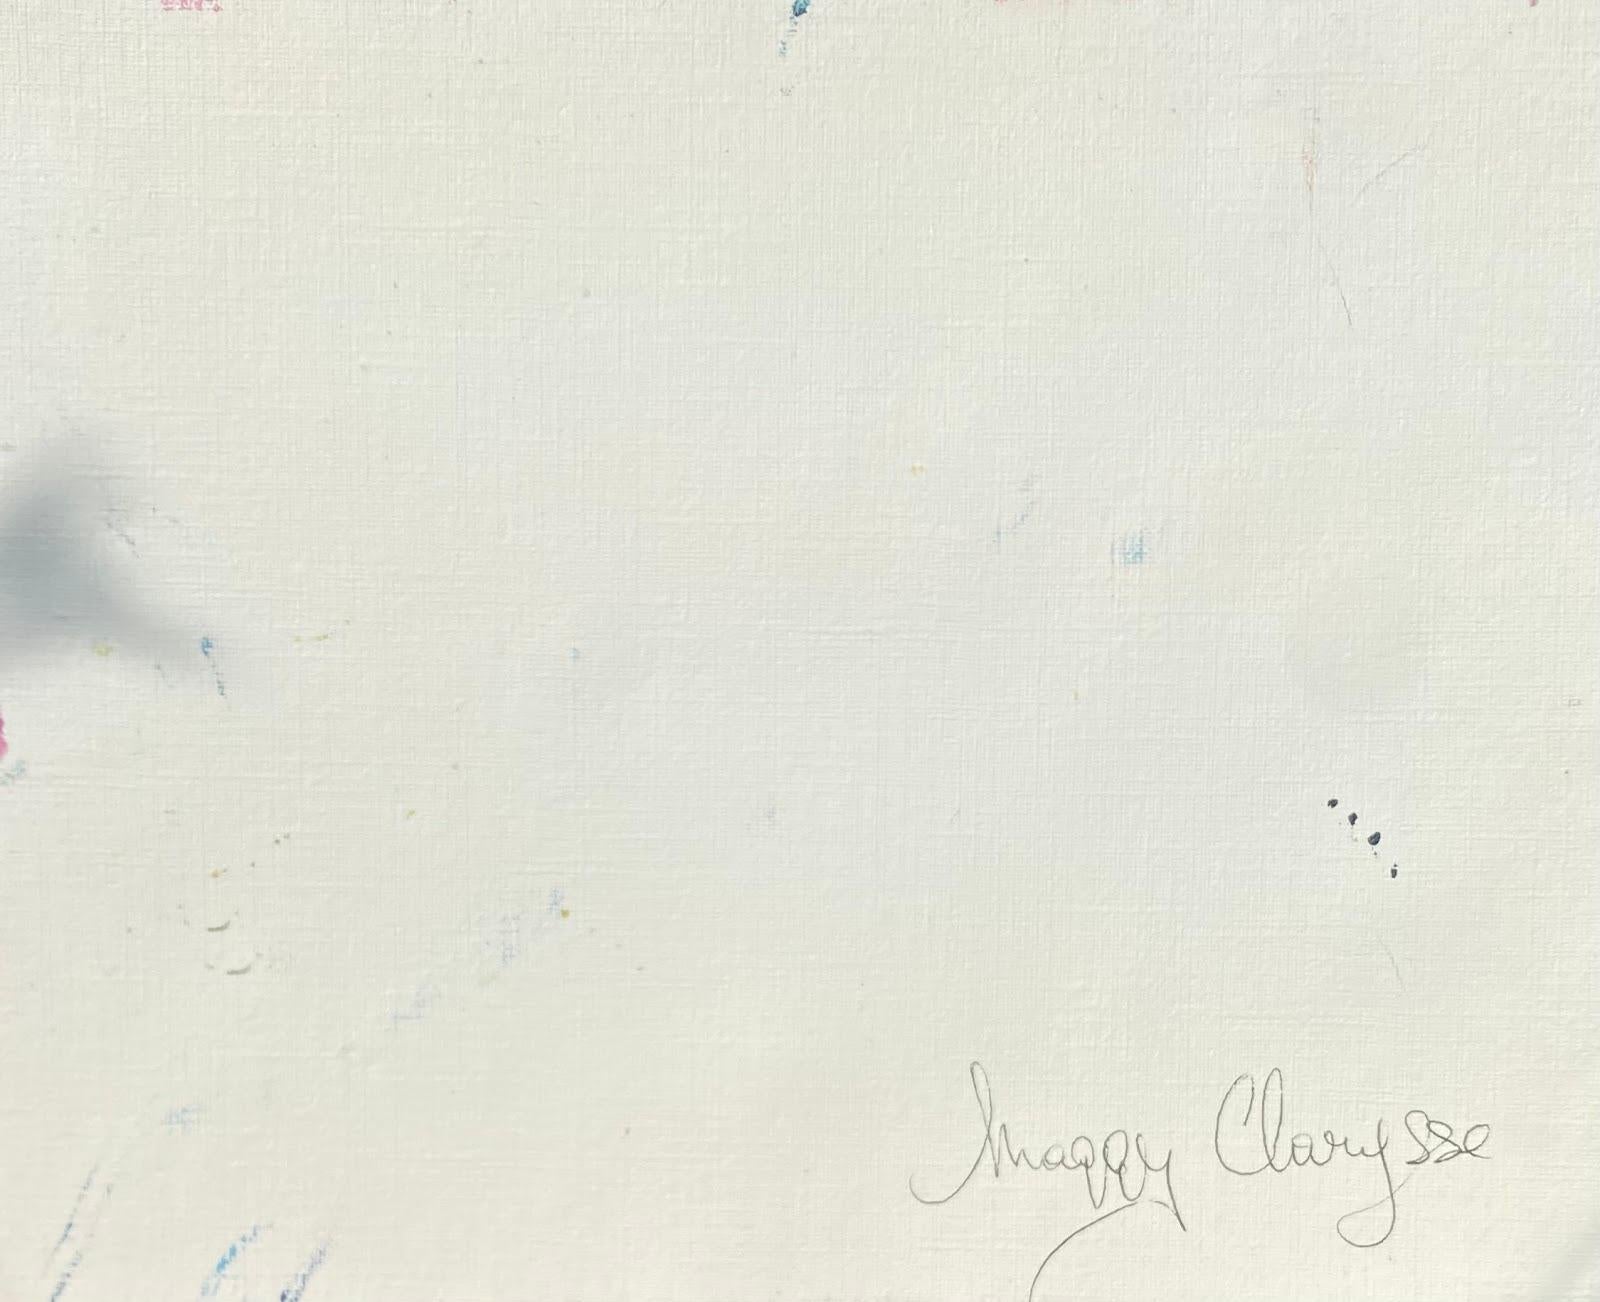 Maggy Clarysse (1931-2011)
Oil on thick card, unframed
7.5 x 9.5 inches
Signed In verso                                                                                                             
condition: excellent
provenance: all the paintings